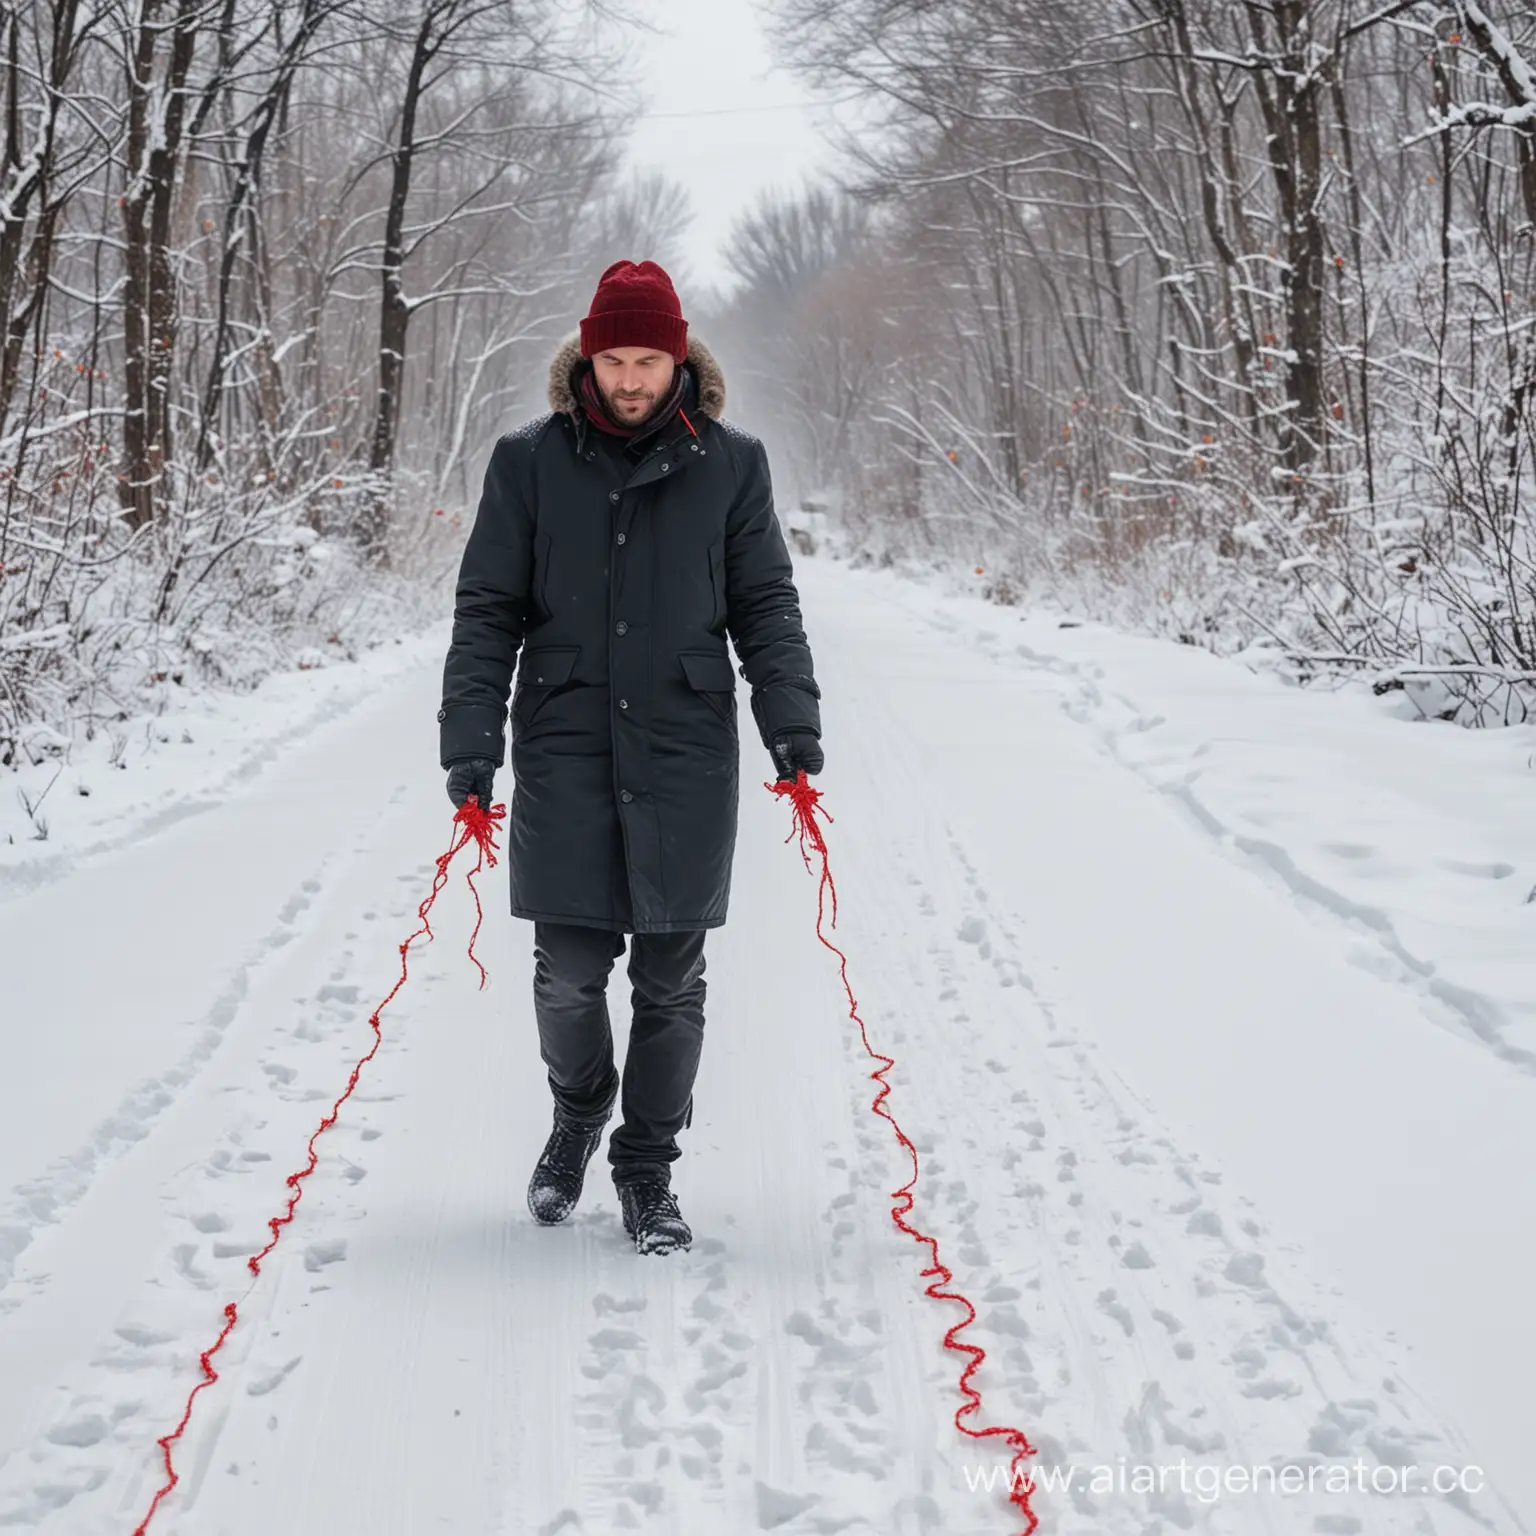 Man-Strolling-on-Snowy-Path-with-Red-Thread